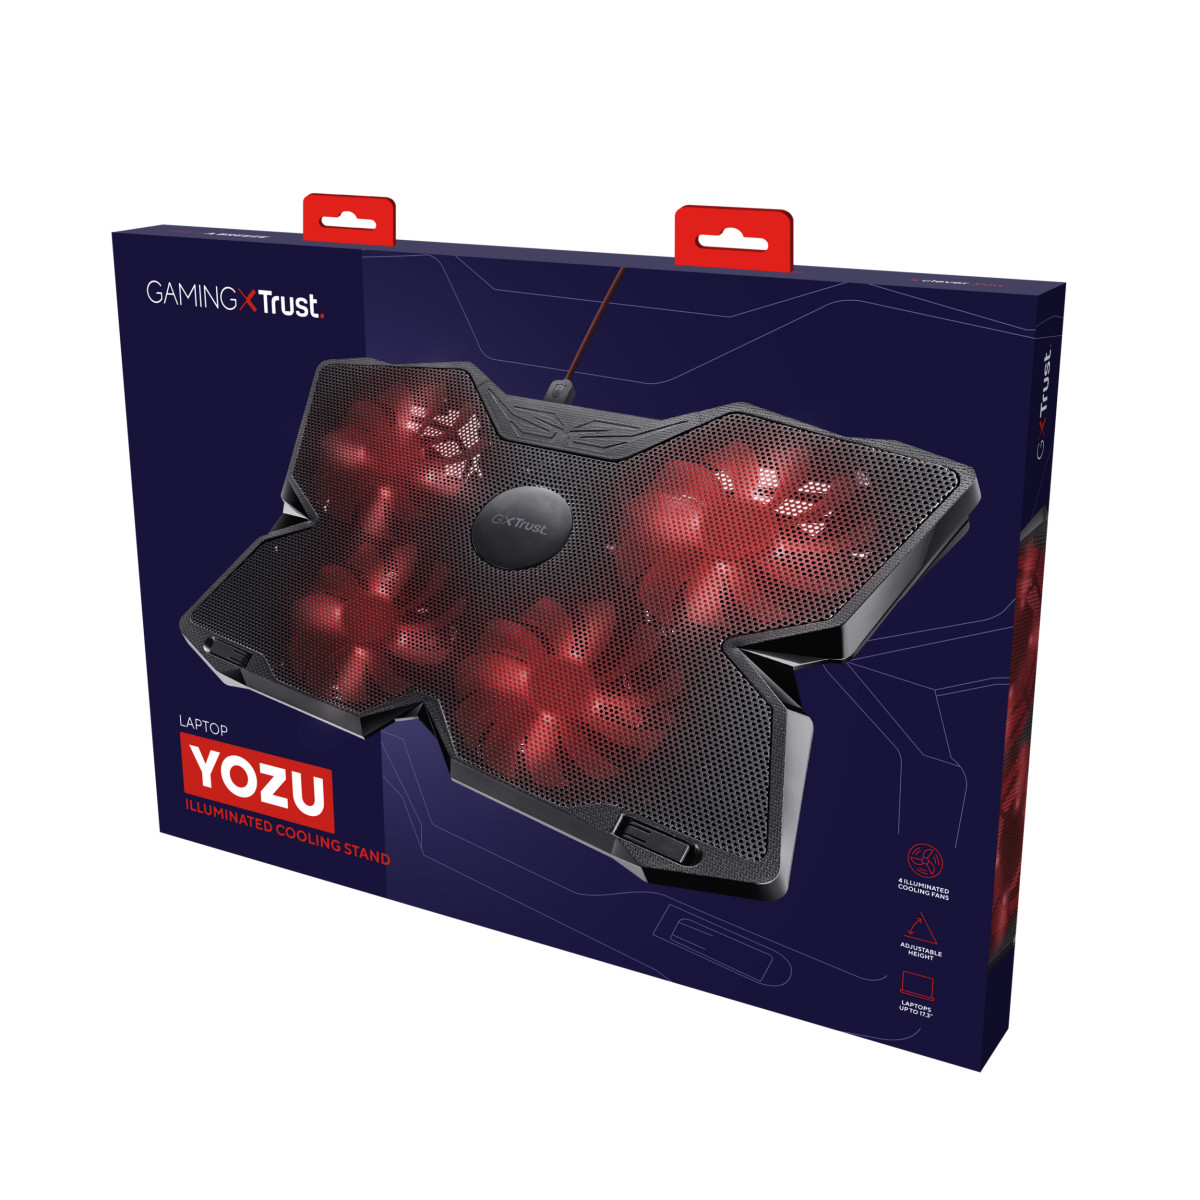 GXt278 Yozu Notebook Cooling Stand